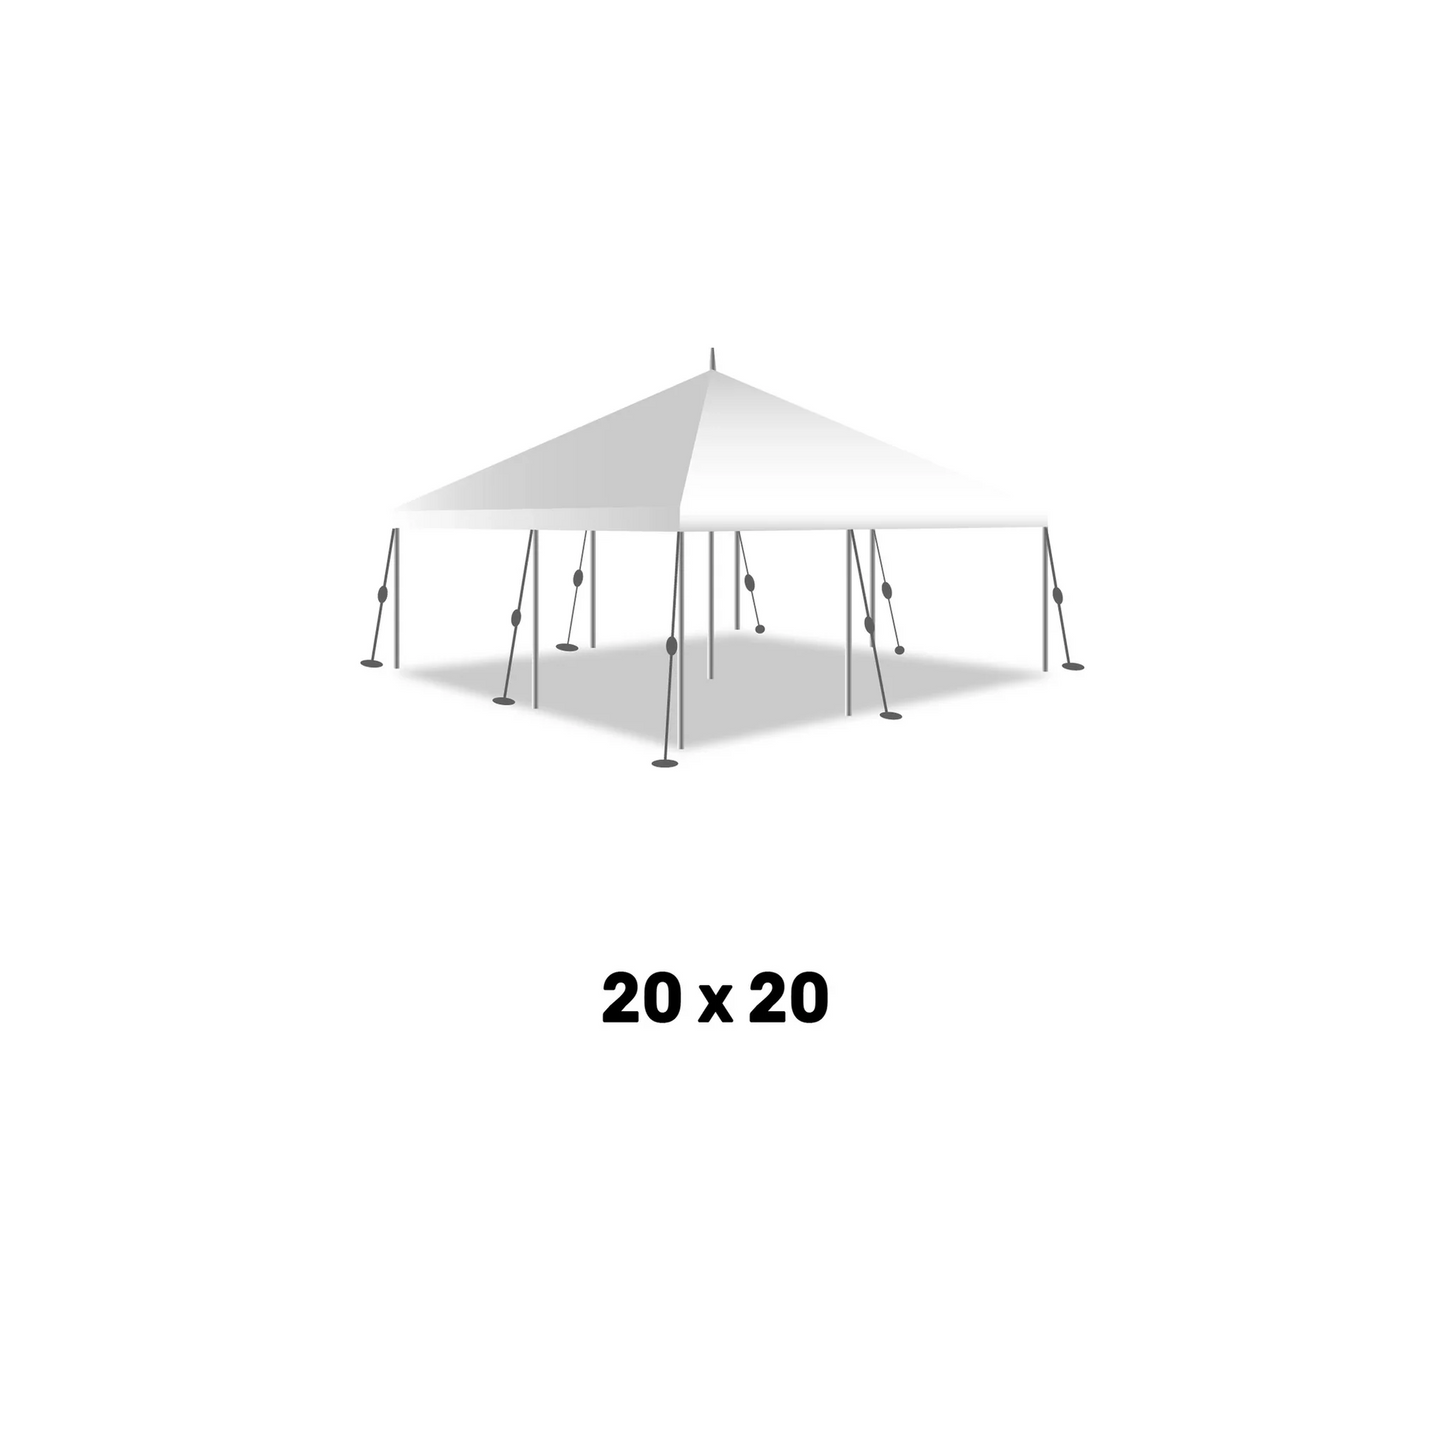 a 15 foot by 20 foot white marquee high peak pole tent